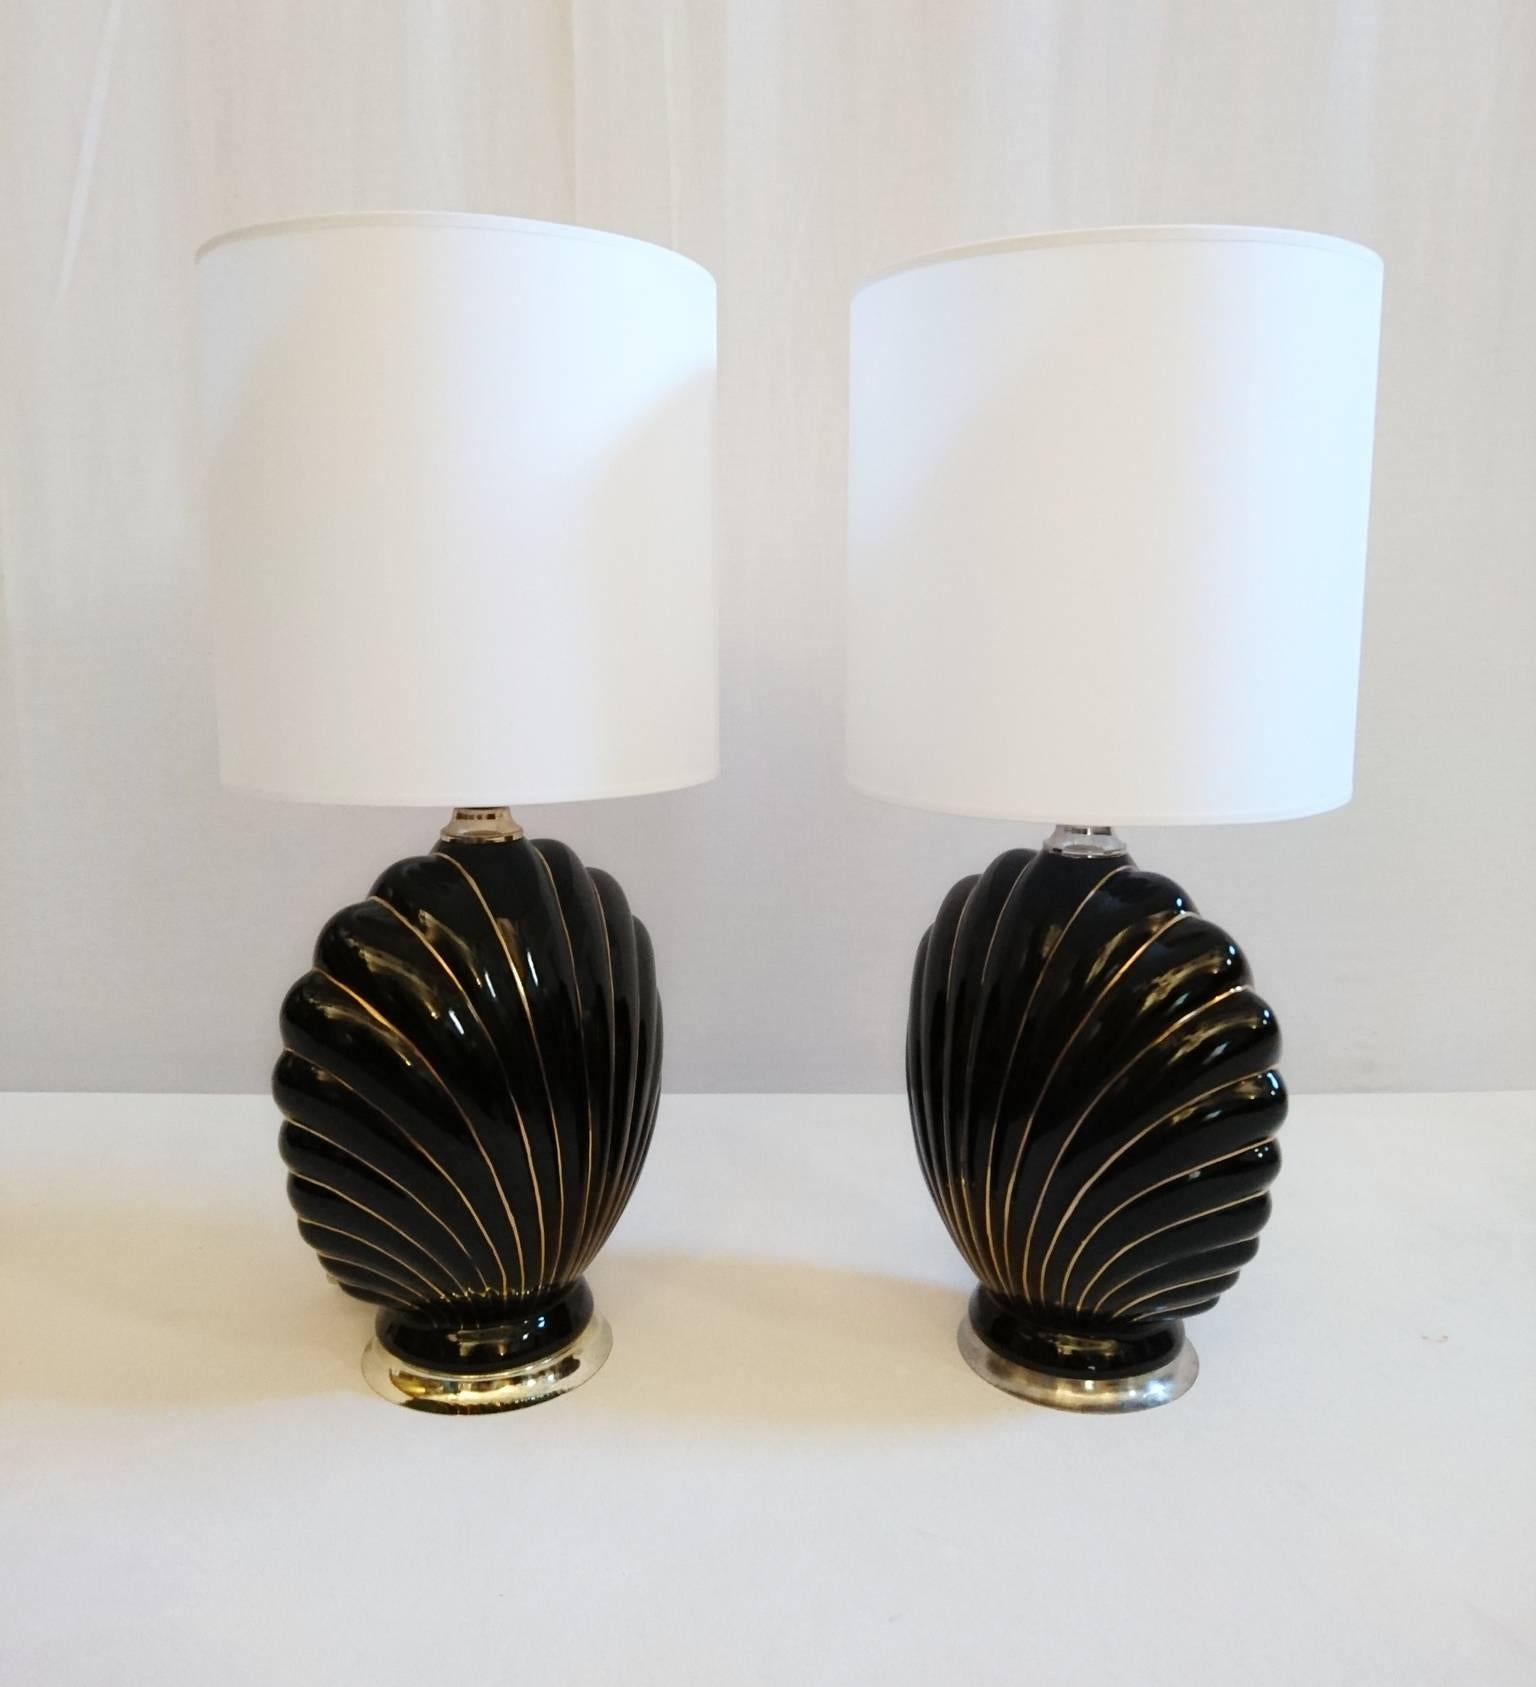 A pair of matching coquille table lamps in black porcelain with gold stripes. They are similar but not identical on the base. But that´s hardly detectable if they are not standing next to each other. Brand new white lampshades.